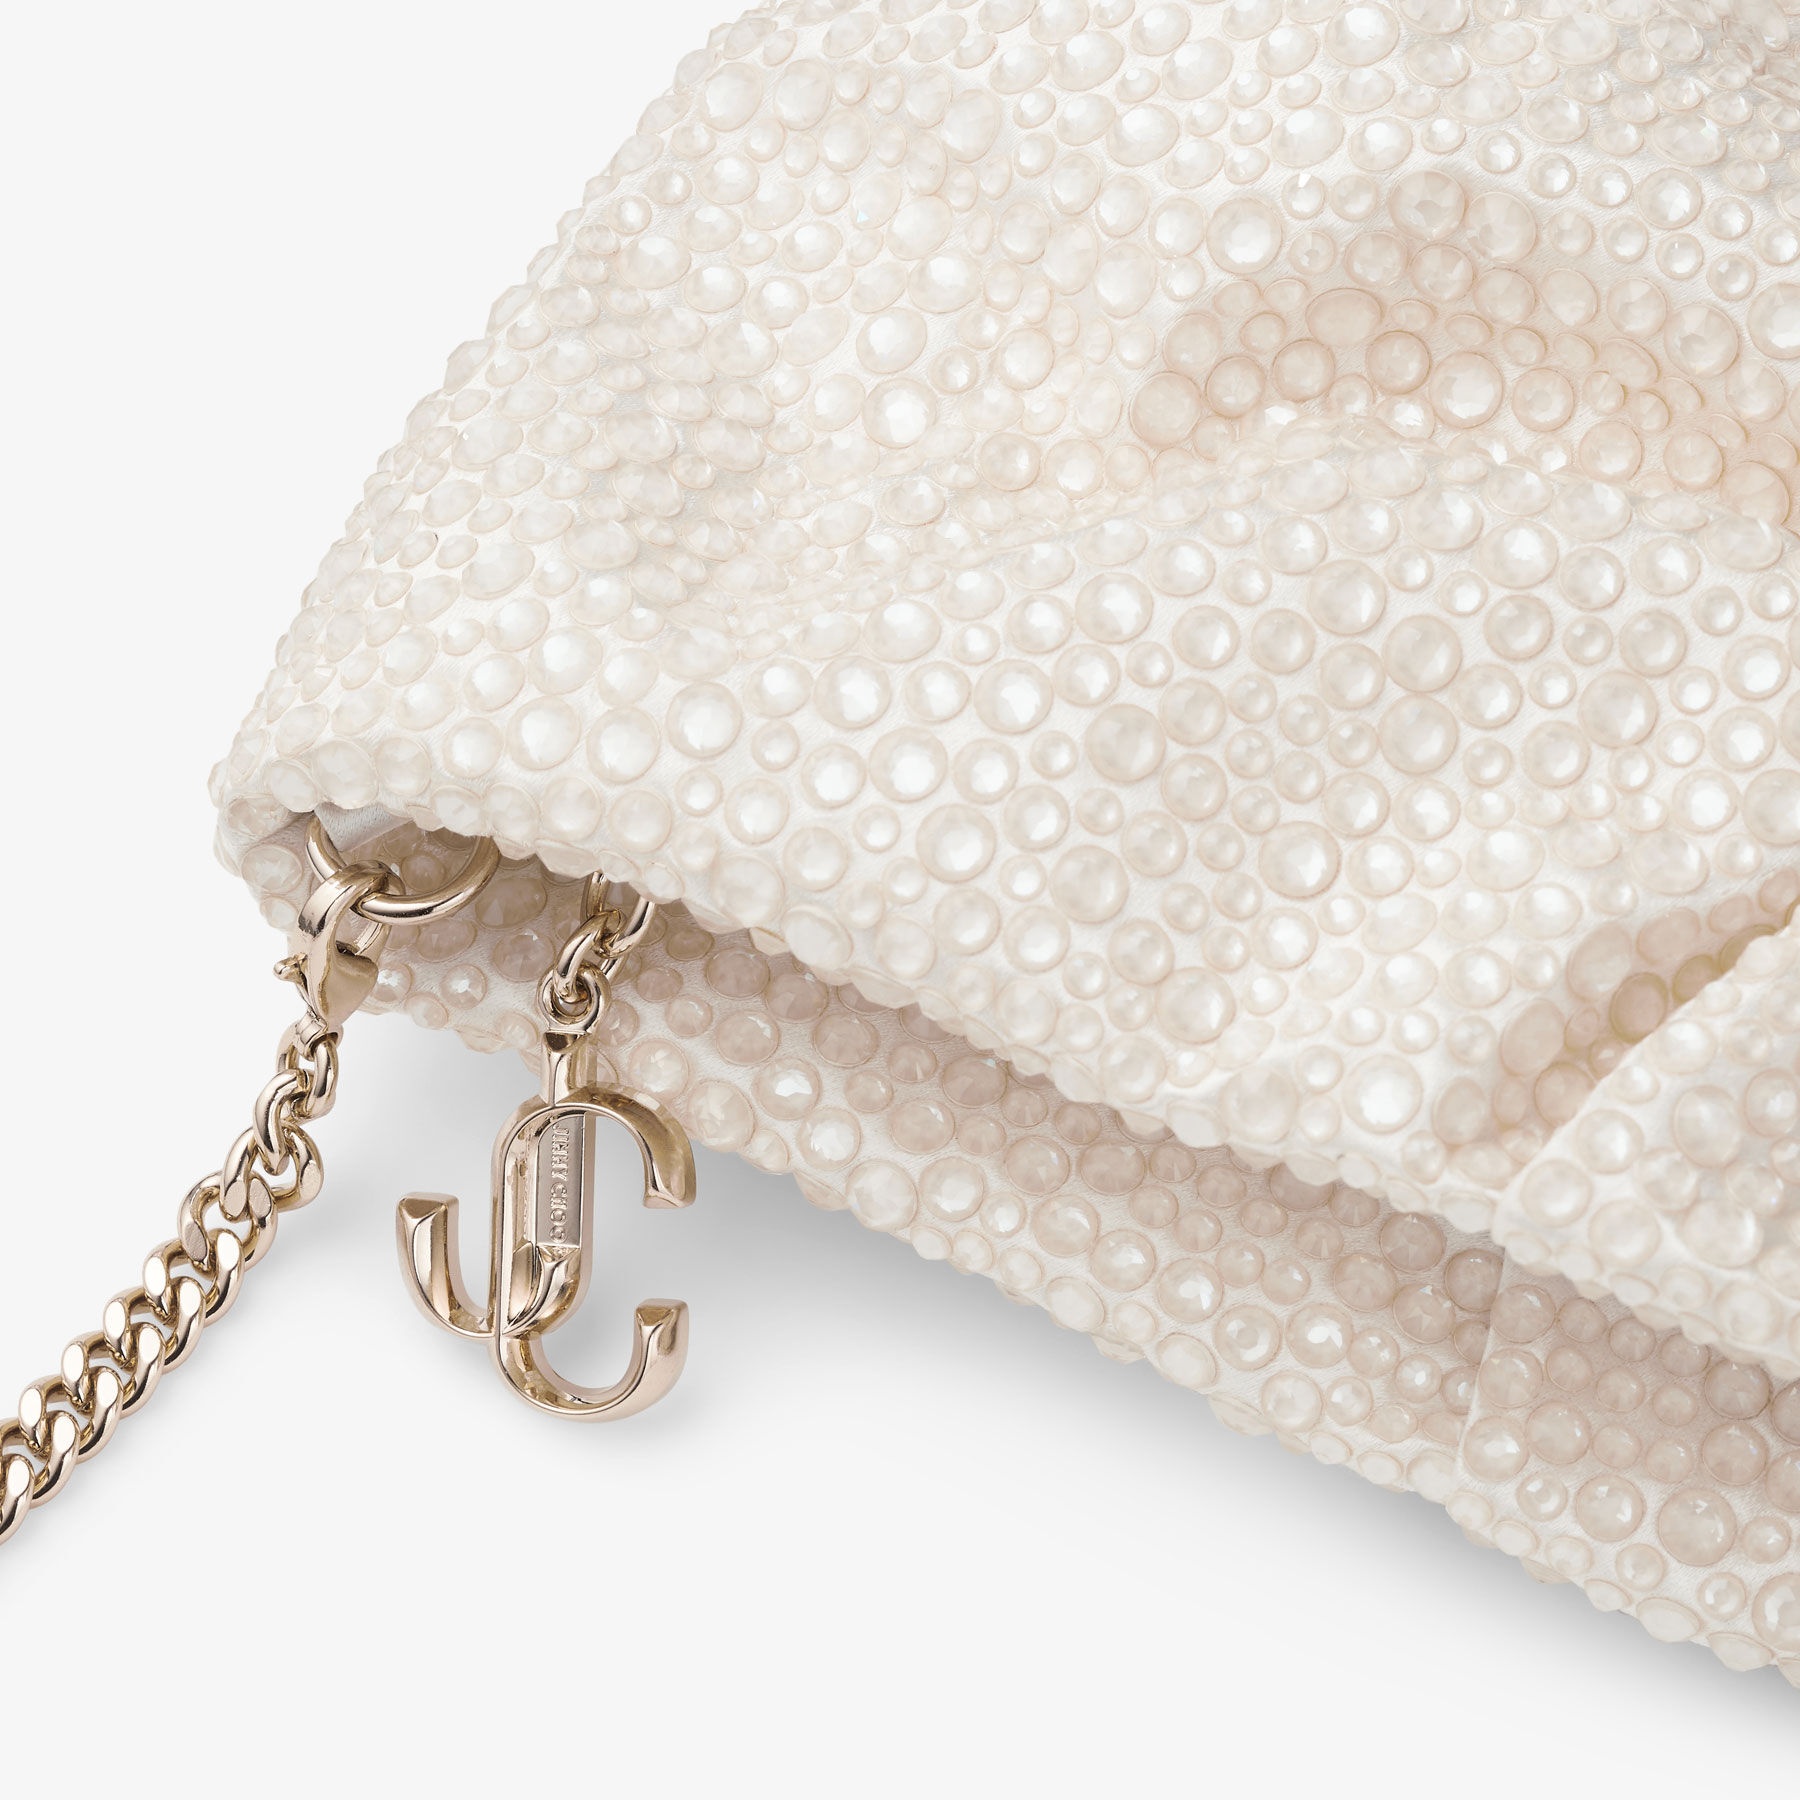 Bonny Clutch
Ivory Satin Clutch Bag with Crystals - 3